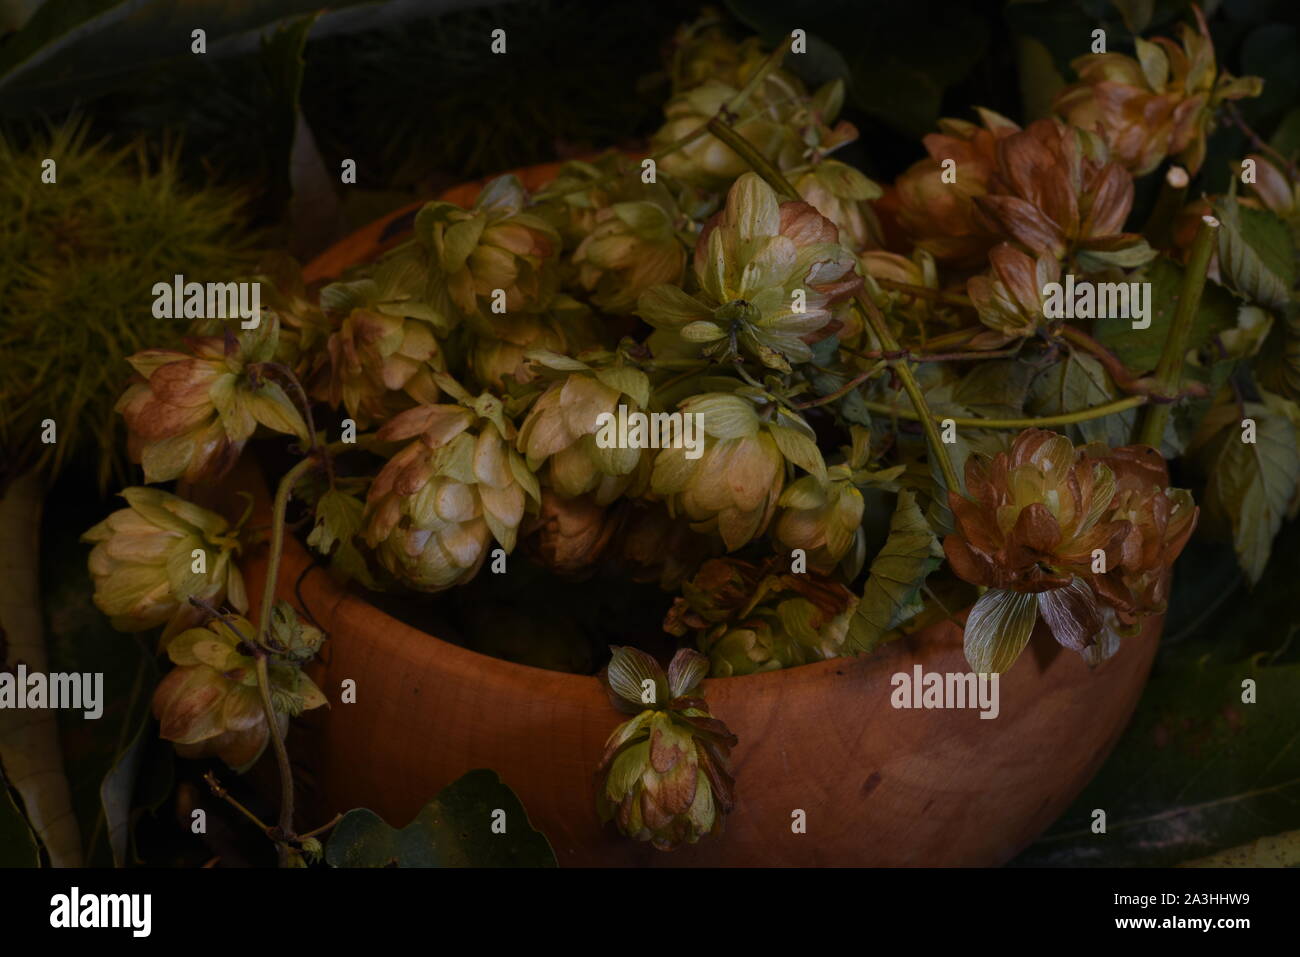 Autumn Hops (Humulus lupulus) from the English hedgerow in a hand turned wooden bowl set to mellow tones Stock Photo